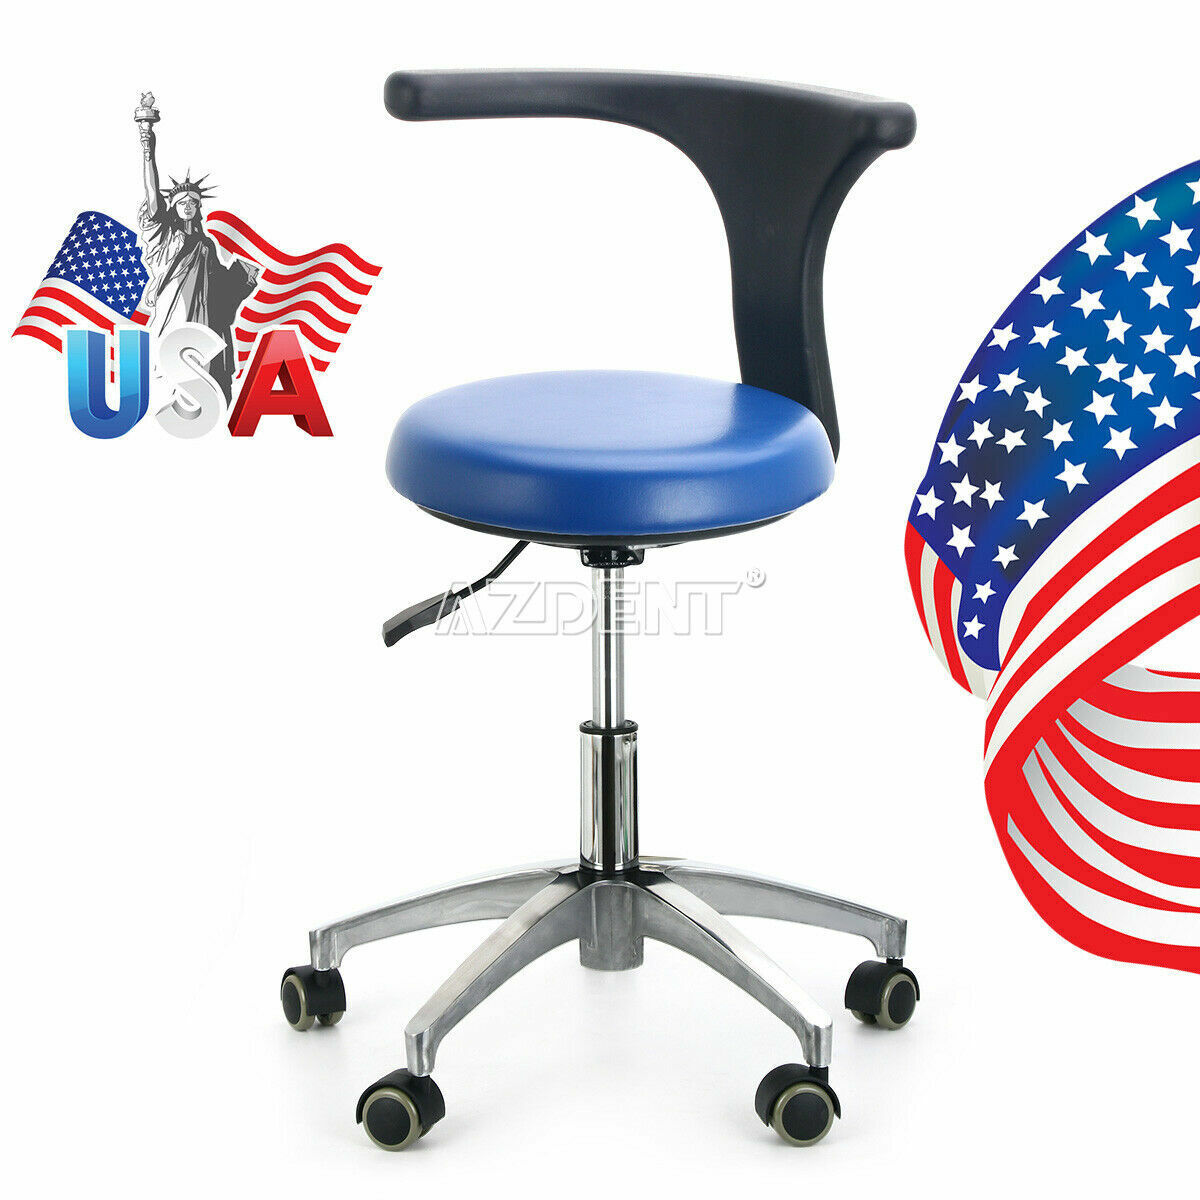 Dental Mobile Chair Adjustable Hydraulic Rolling Stool Dentist Chair PU Leather